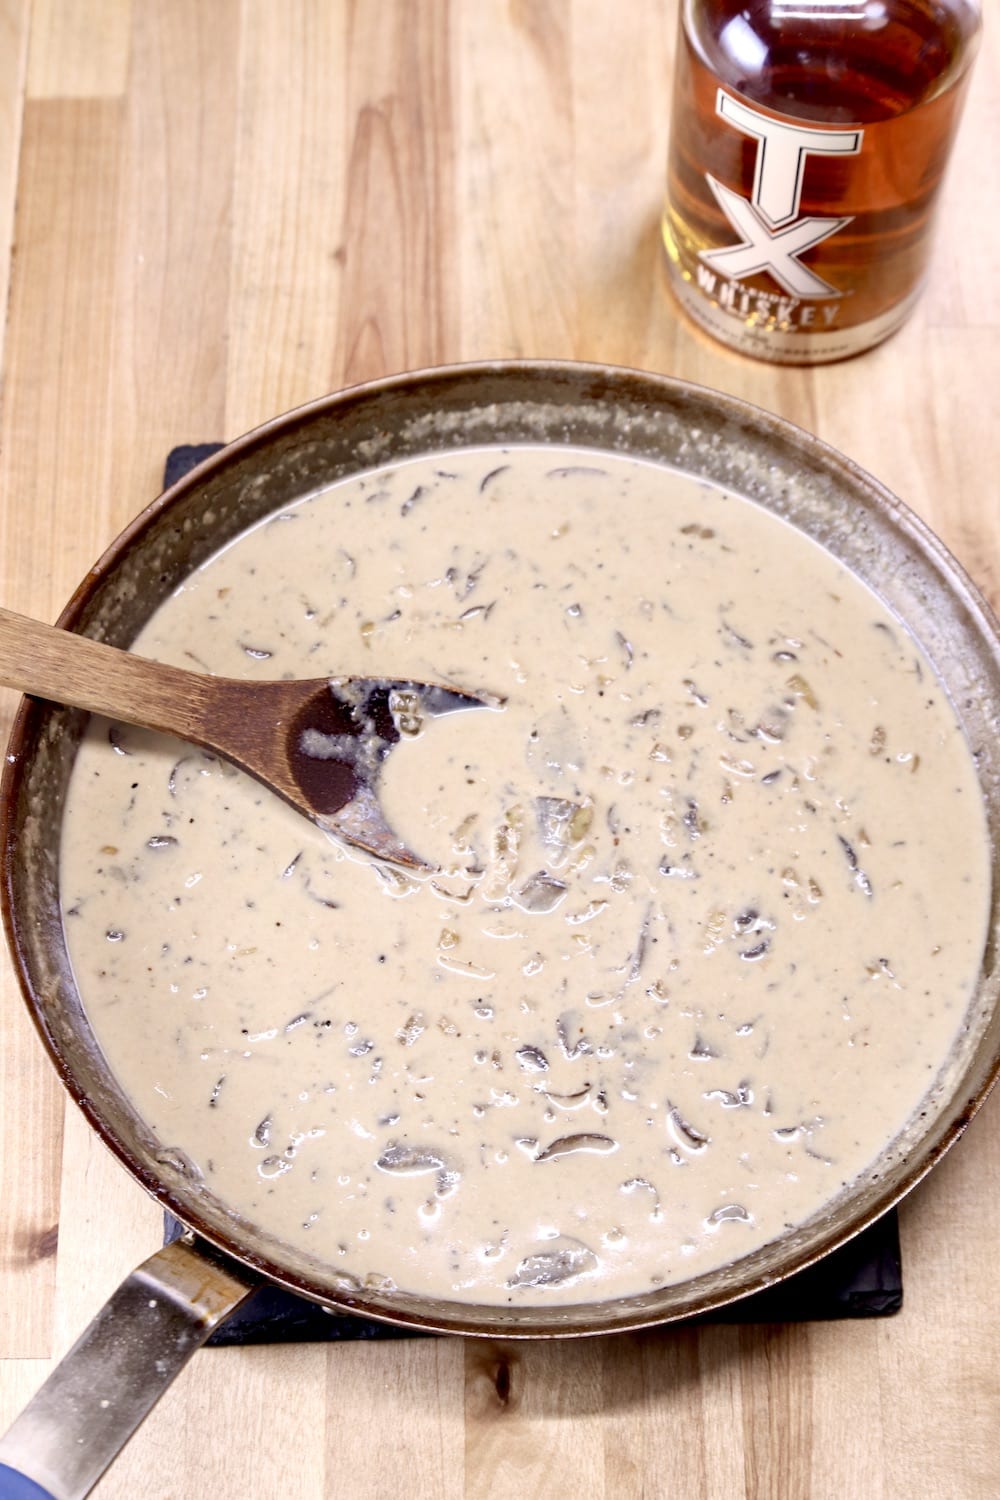 pan of creamy mushroom sauce with a wood spoon, bottle of whiskey to the side